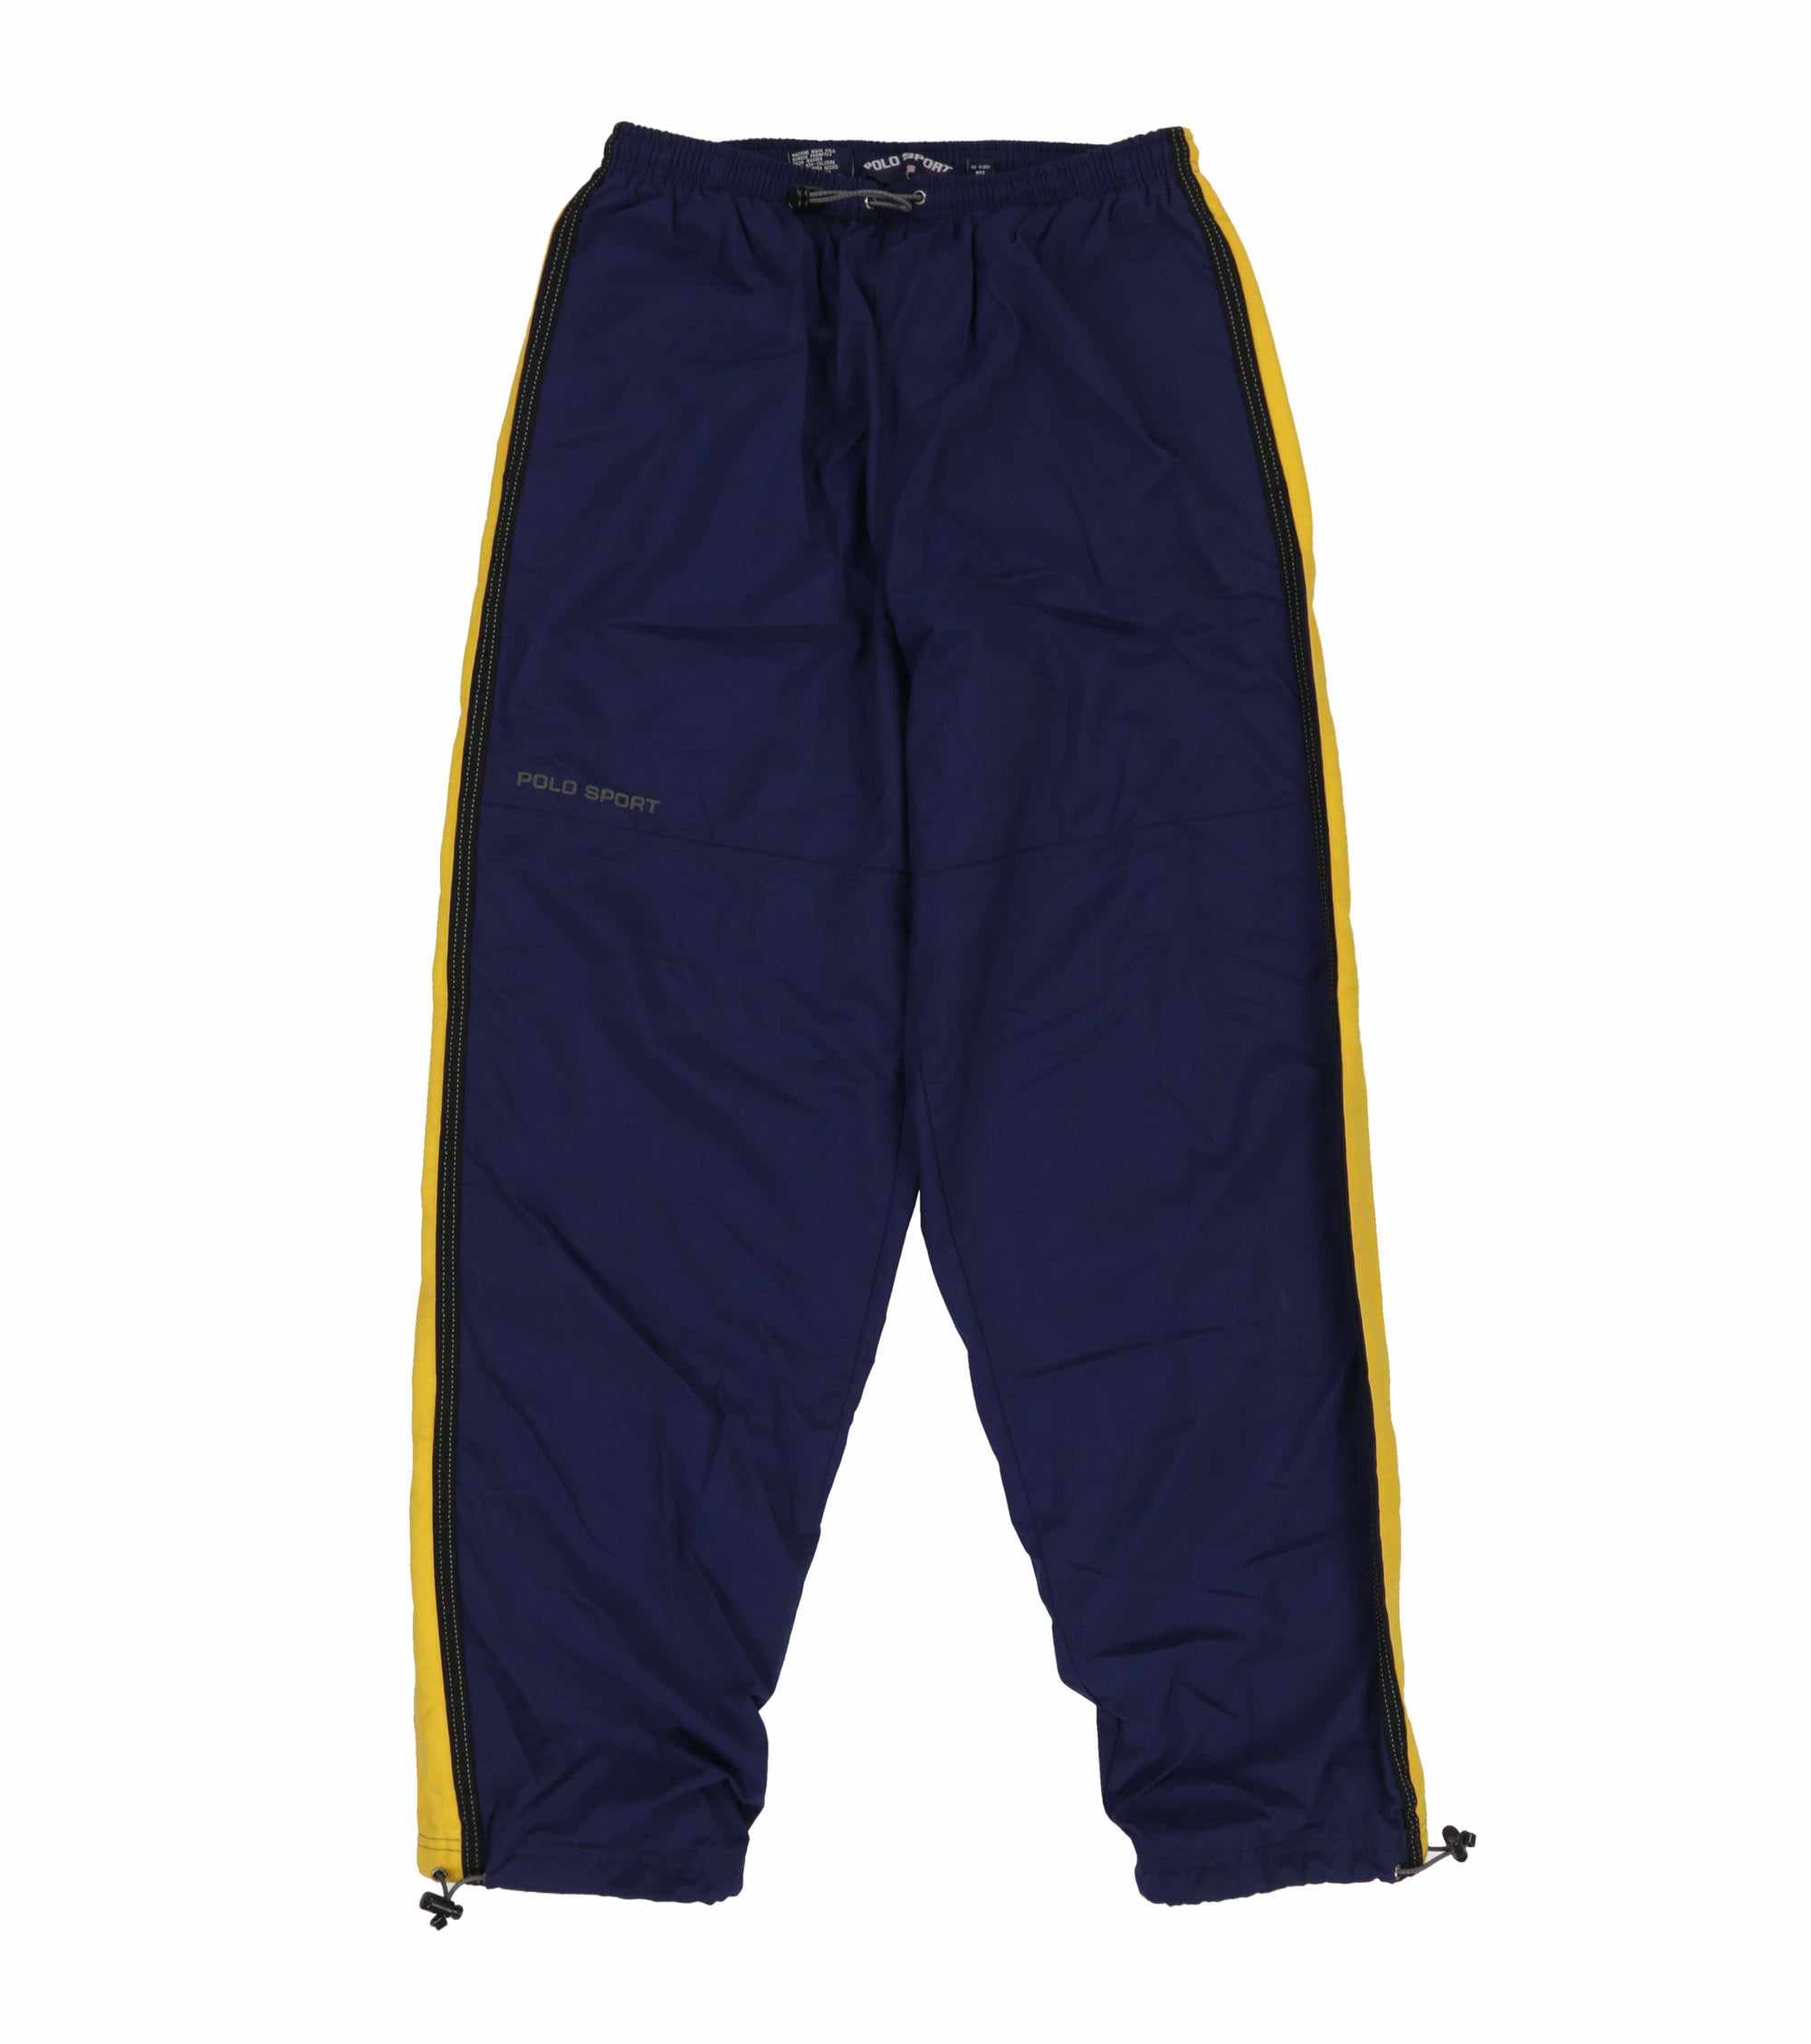 POLO SPORT EMB SPELL OUT TRACKSUIT // NAVY YELLOW